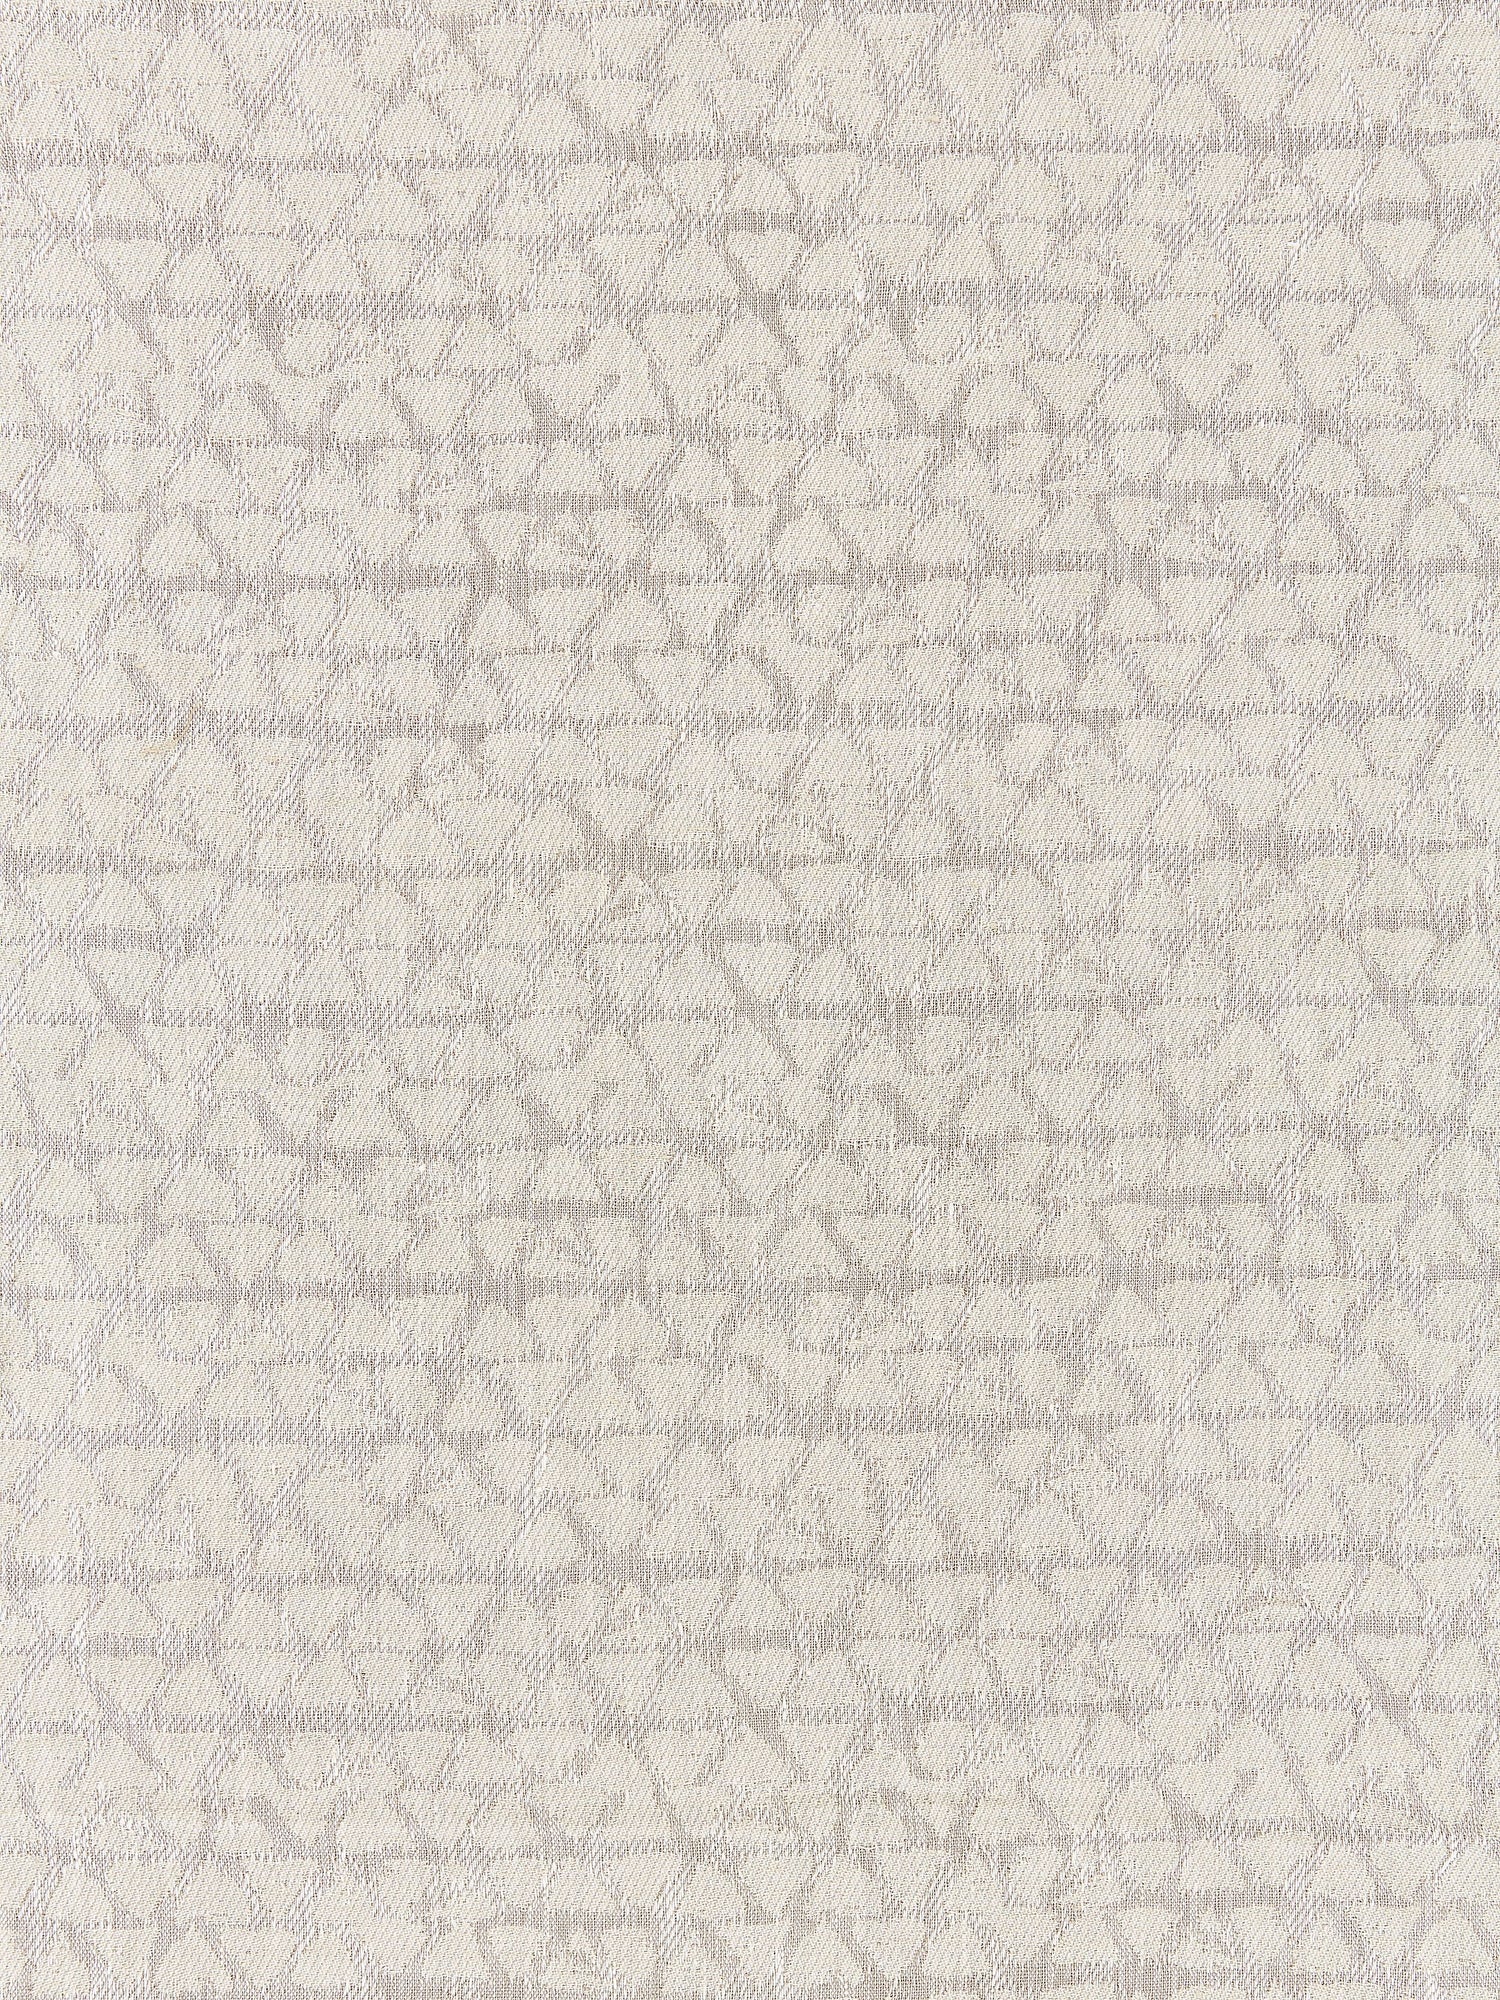 Kanoko fabric in natural color - pattern number SC 000127148 - by Scalamandre in the Scalamandre Fabrics Book 1 collection